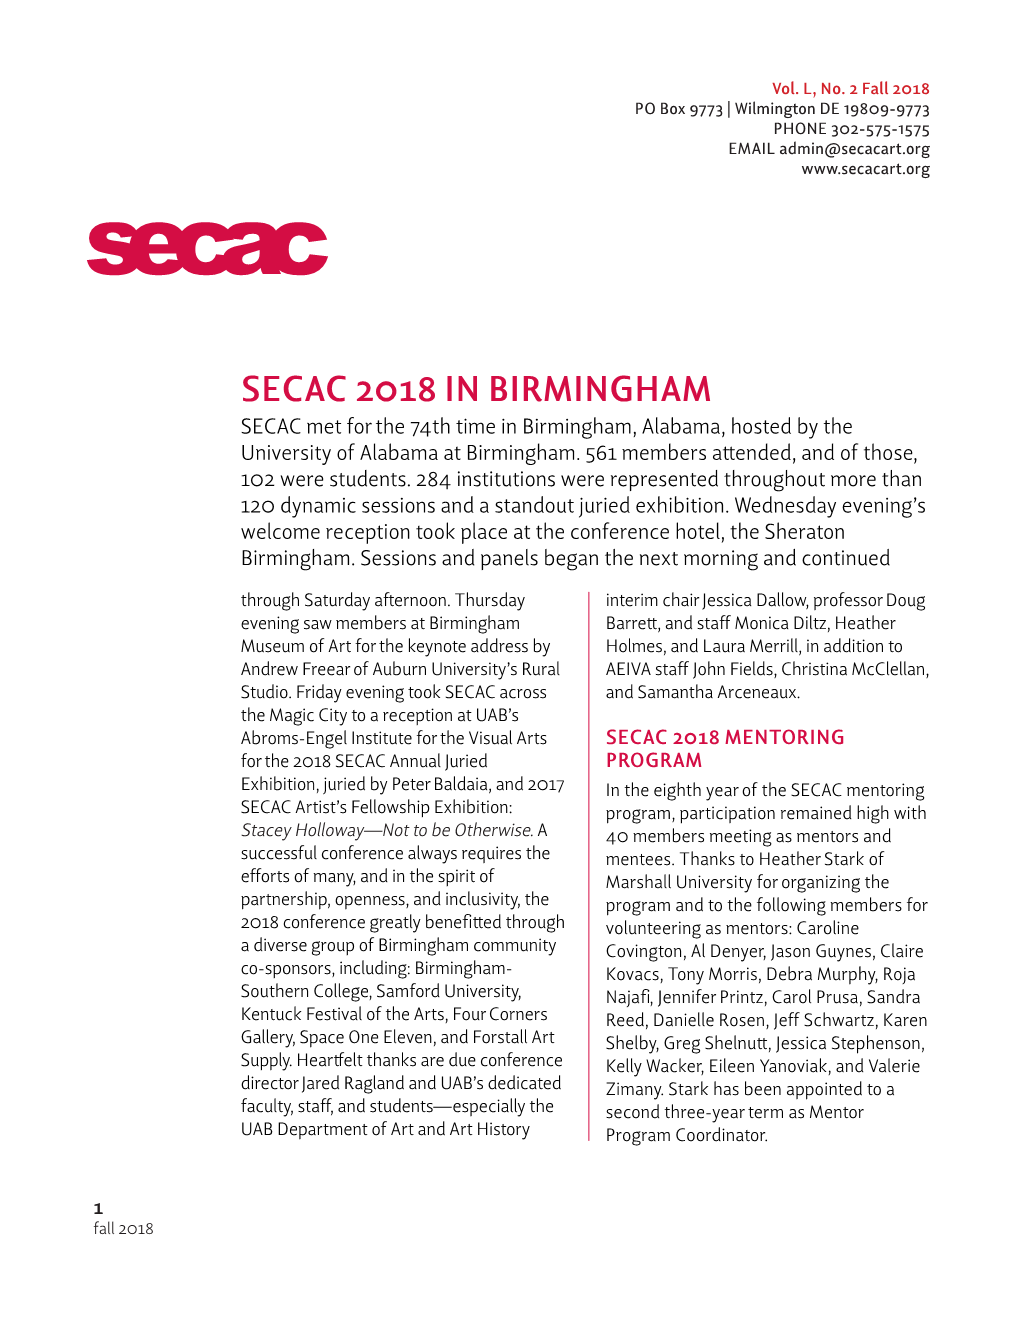 SECAC 2018 in BIRMINGHAM SECAC Met for the 74Th Time in Birmingham, Alabama, Hosted by the University of Alabama at Birmingham